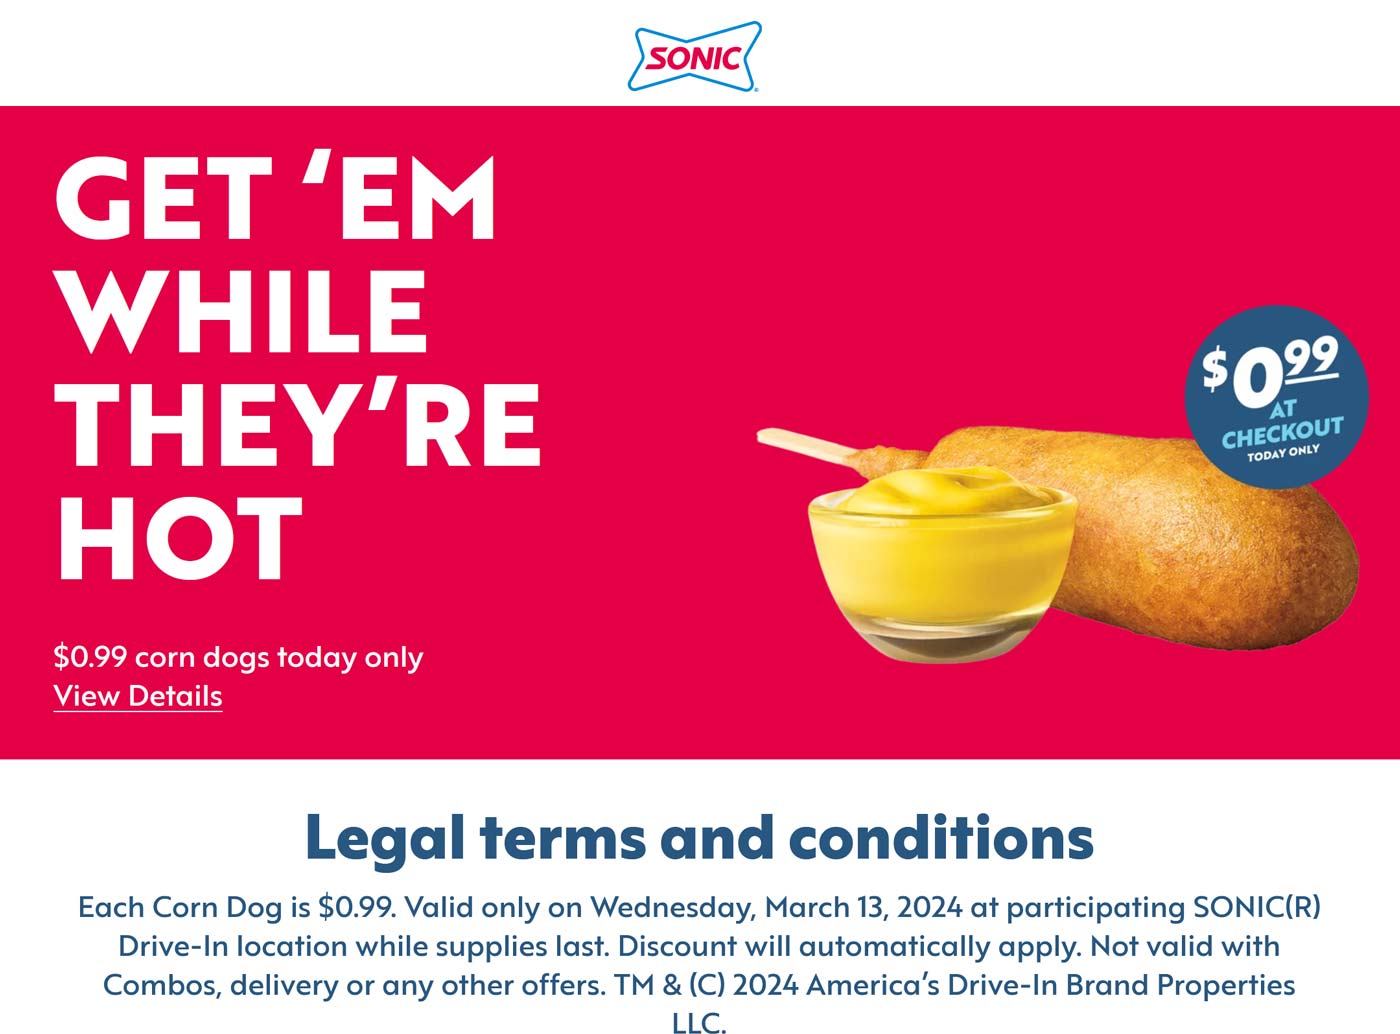 Sonic Drive-In restaurants Coupon  $1 corn dogs today at Sonic Drive-In restaurants #sonicdrivein 